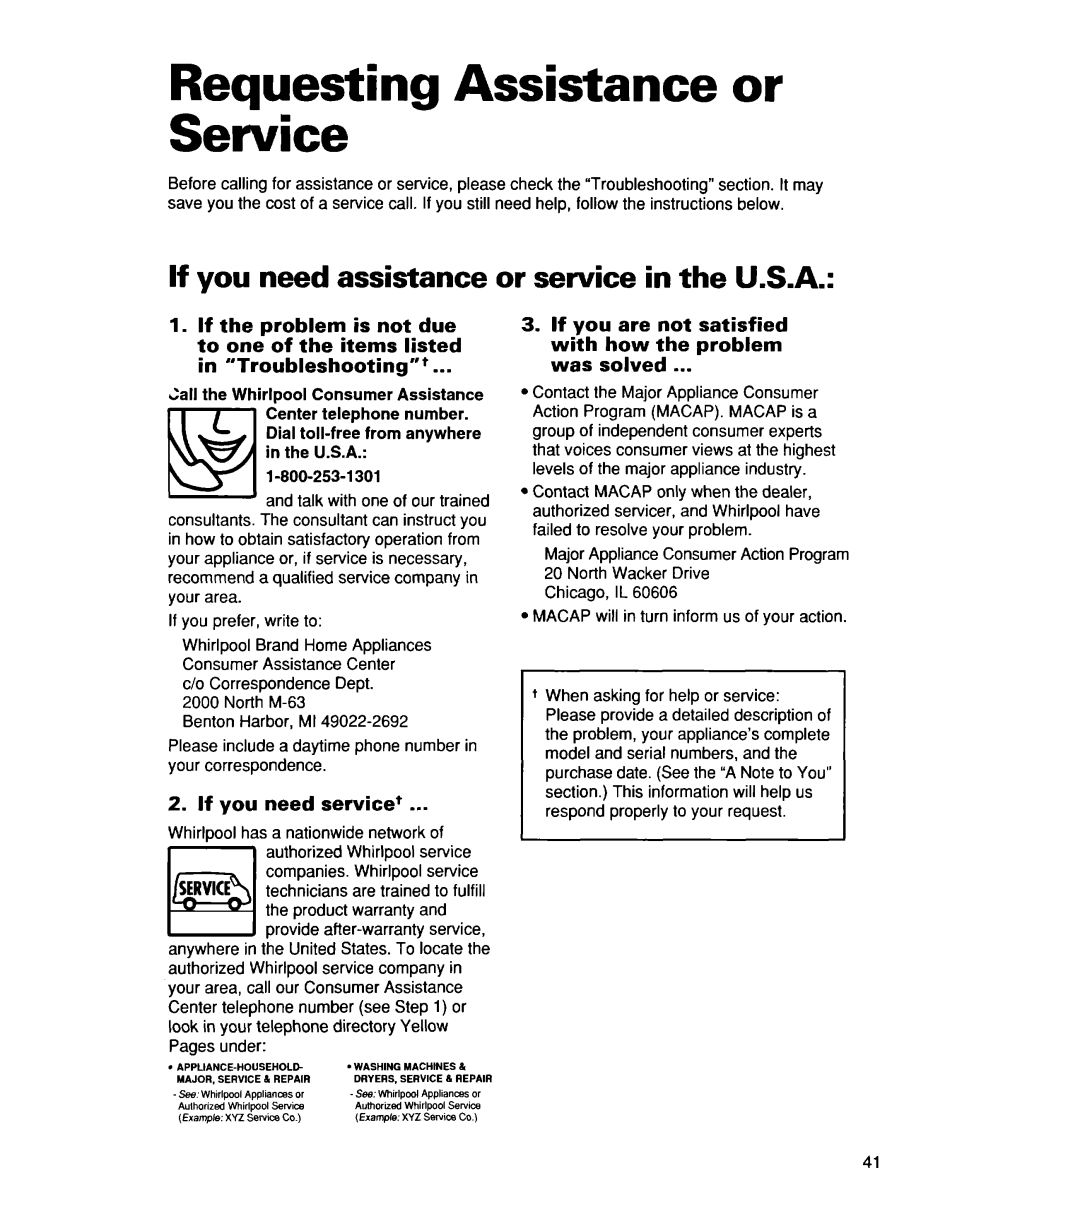 Whirlpool MT8118XE Requesting Assistance or Service, If you need assistance or service in the U.S.A, in “Troubleshooting”+ 